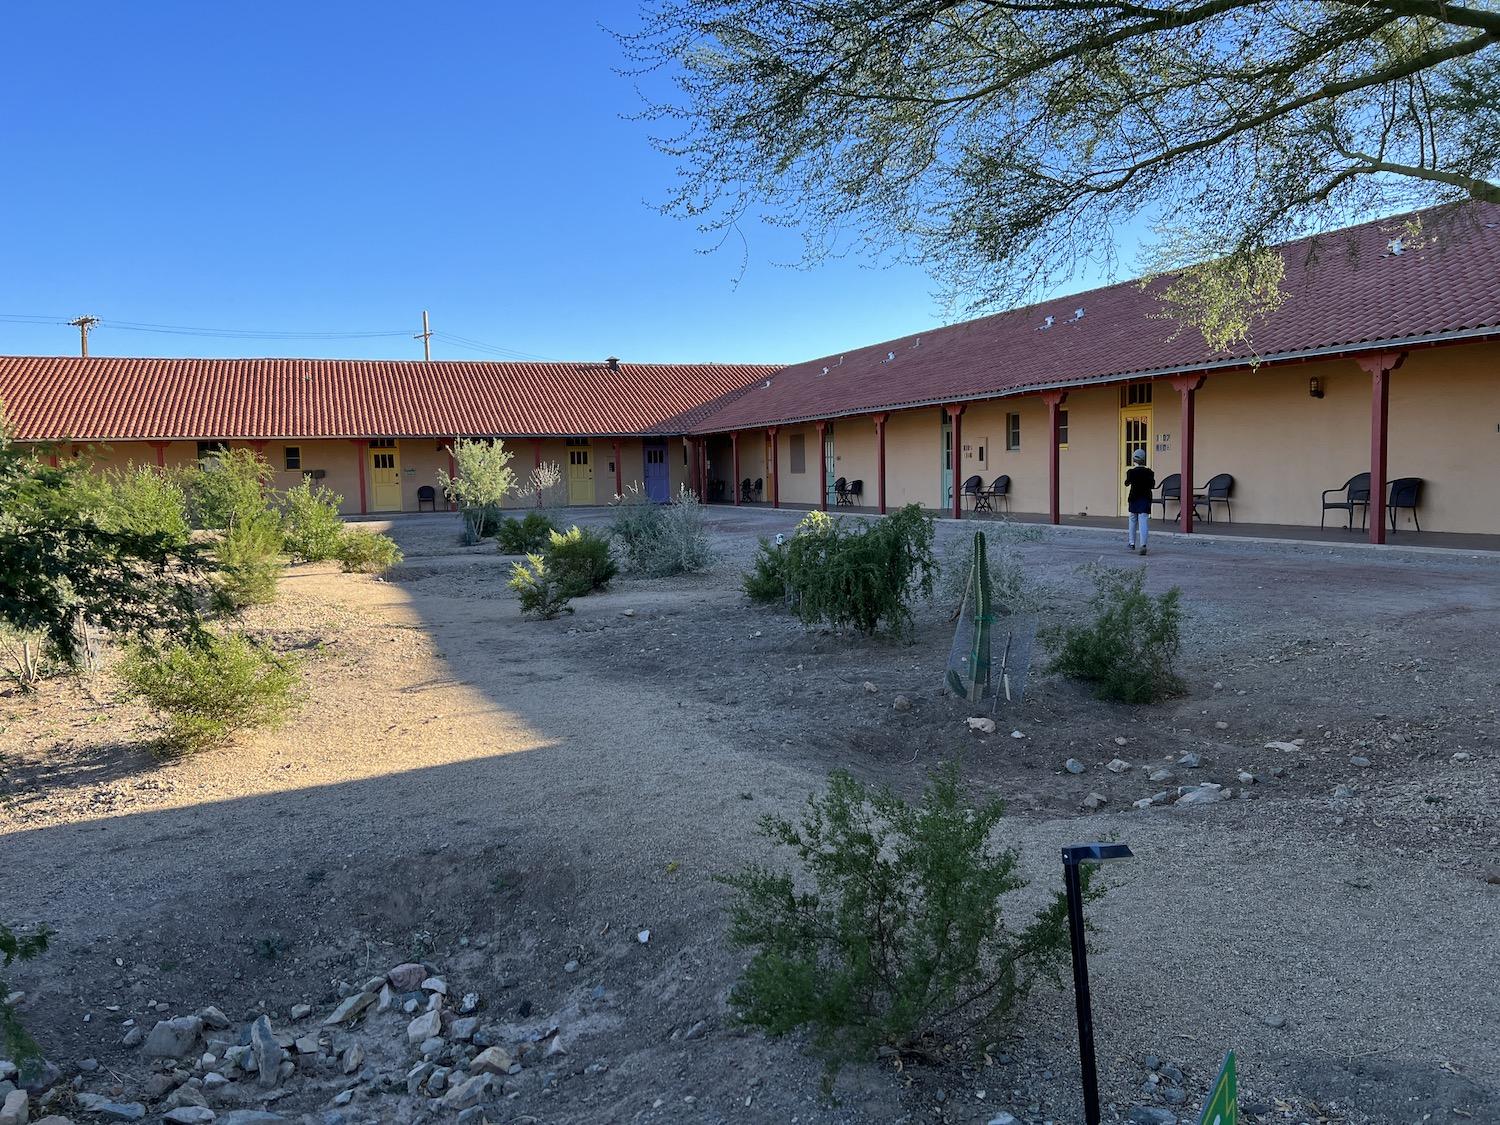 The Sonoran Desert Inn in Ajo is a great base for Organ Pipe Cactus National Monument explorations.